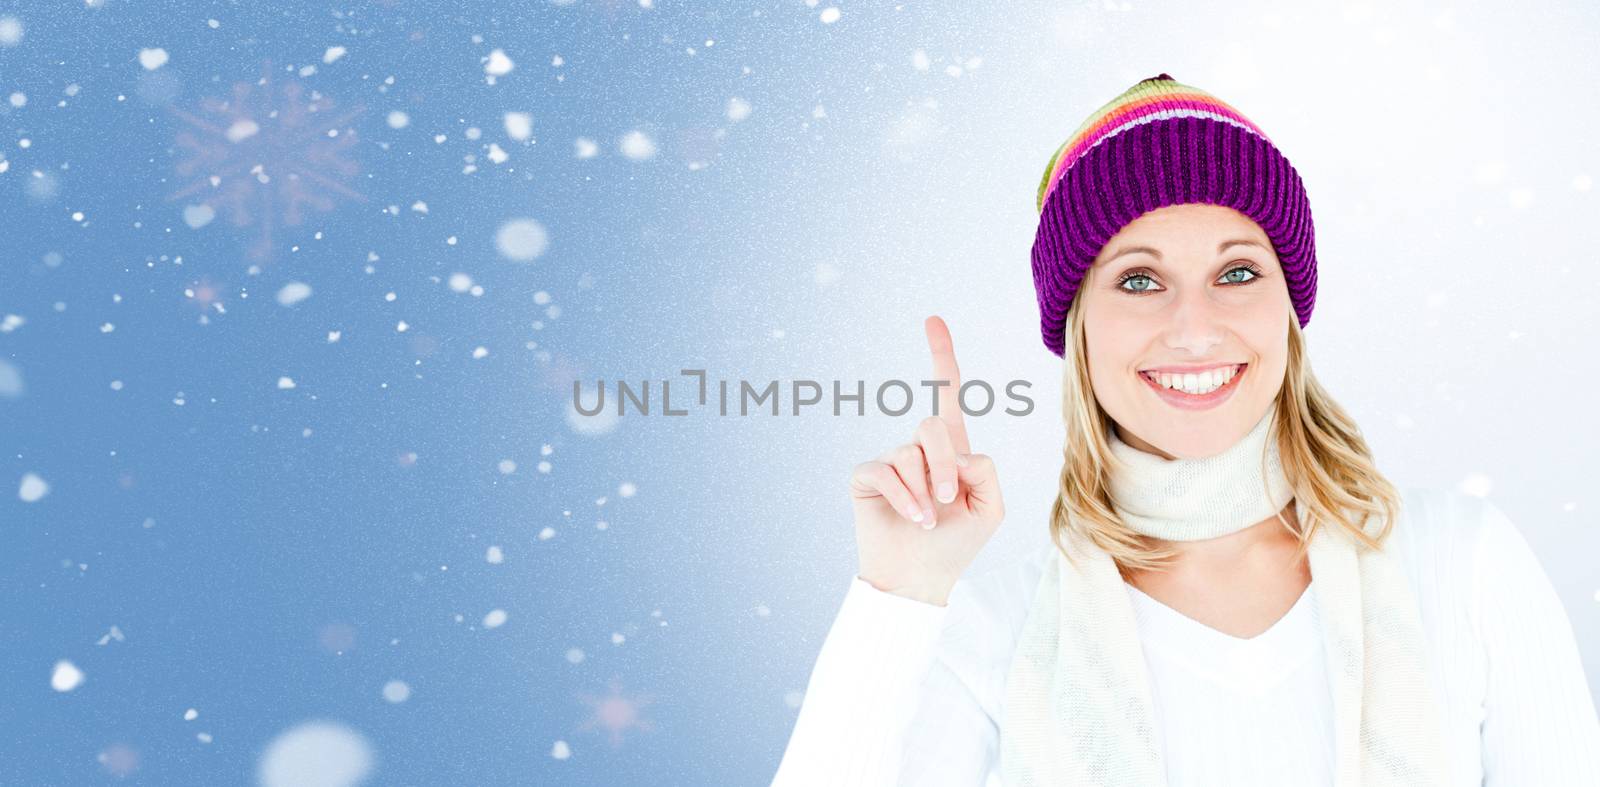 Composite image of joyful woman with a colorful hat pointing upwards by Wavebreakmedia